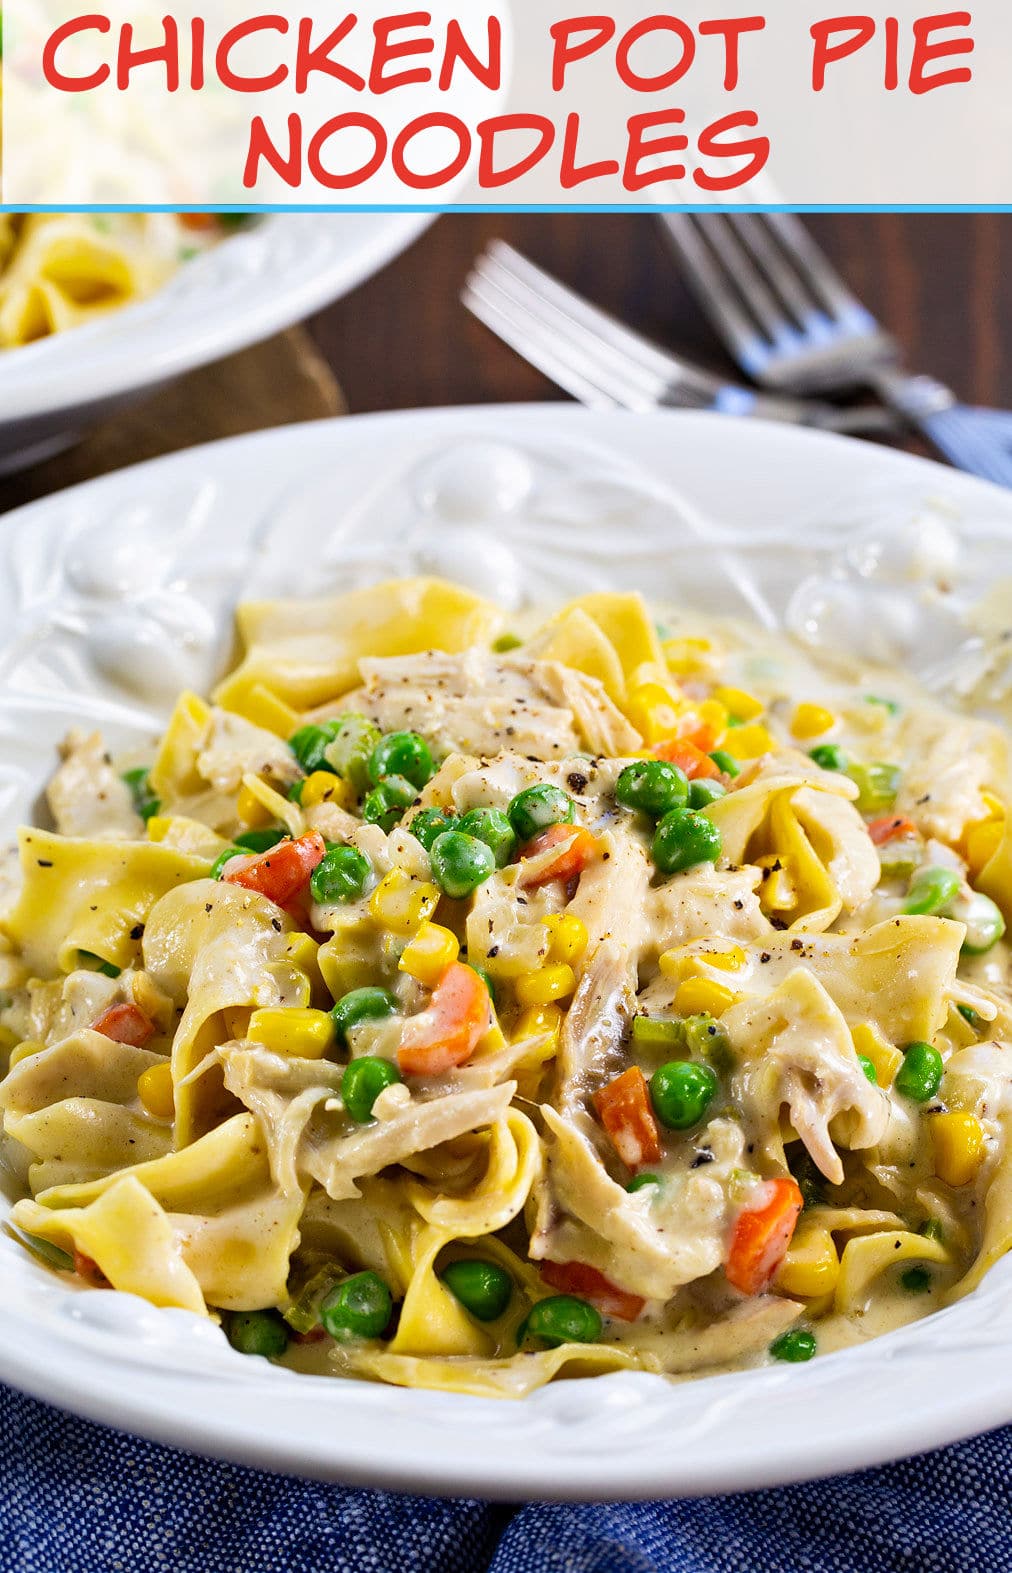 Chicken Pot Pie Noodles dished up in a pasta bowl.